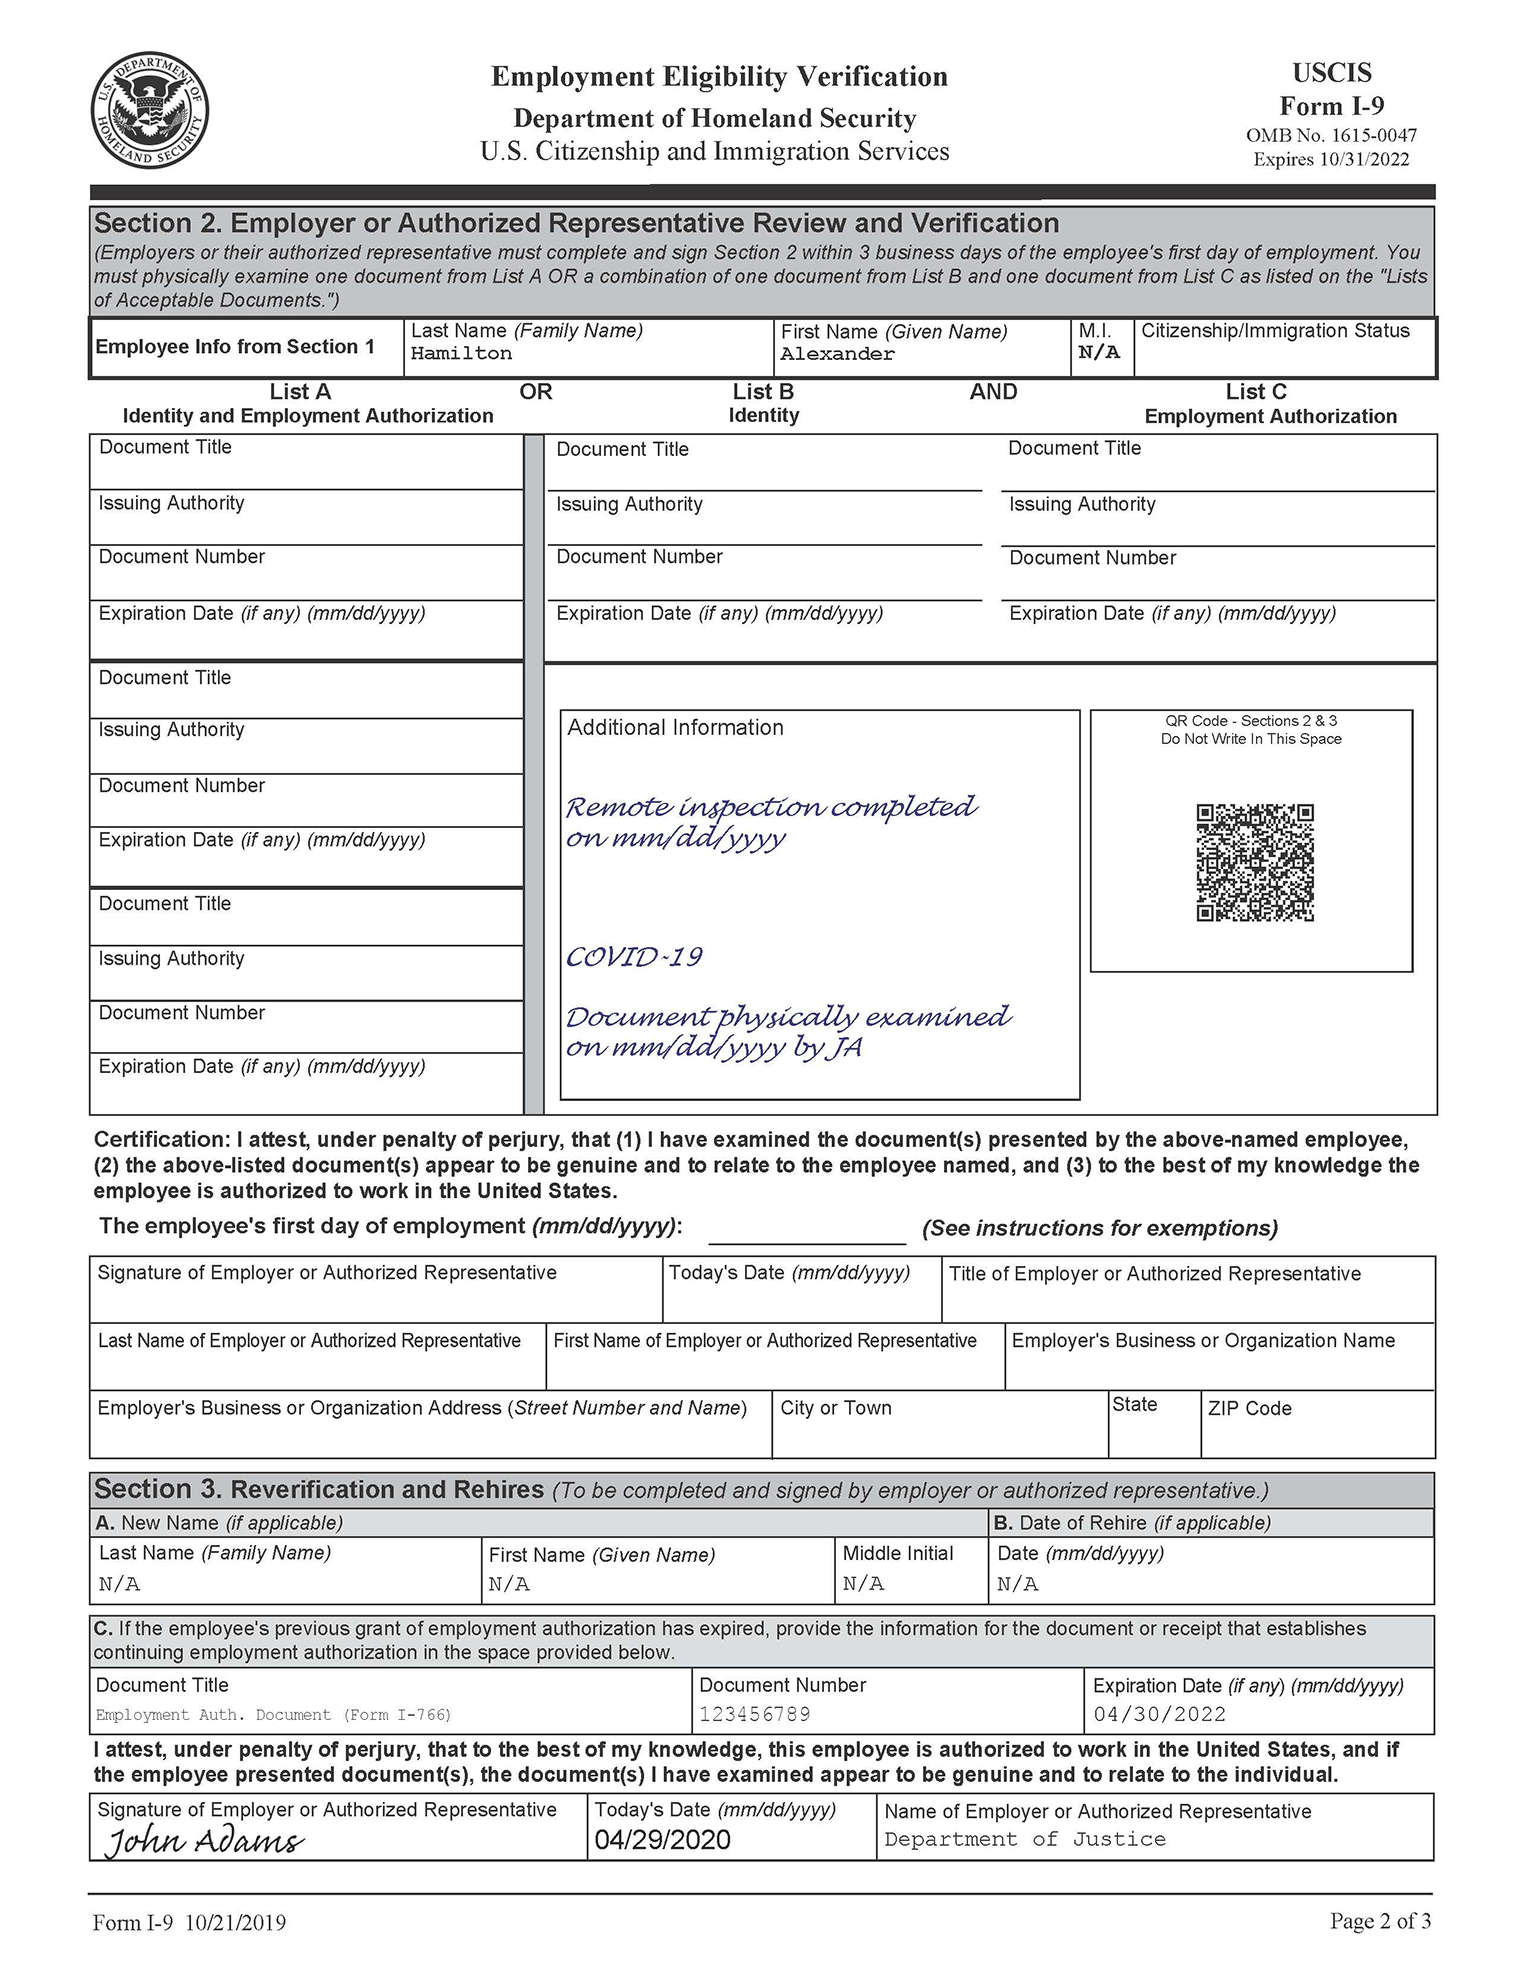 Form I-9 Examples Related To Temporary Covid-19 Policies | Uscis inside I9 Form From USCIS